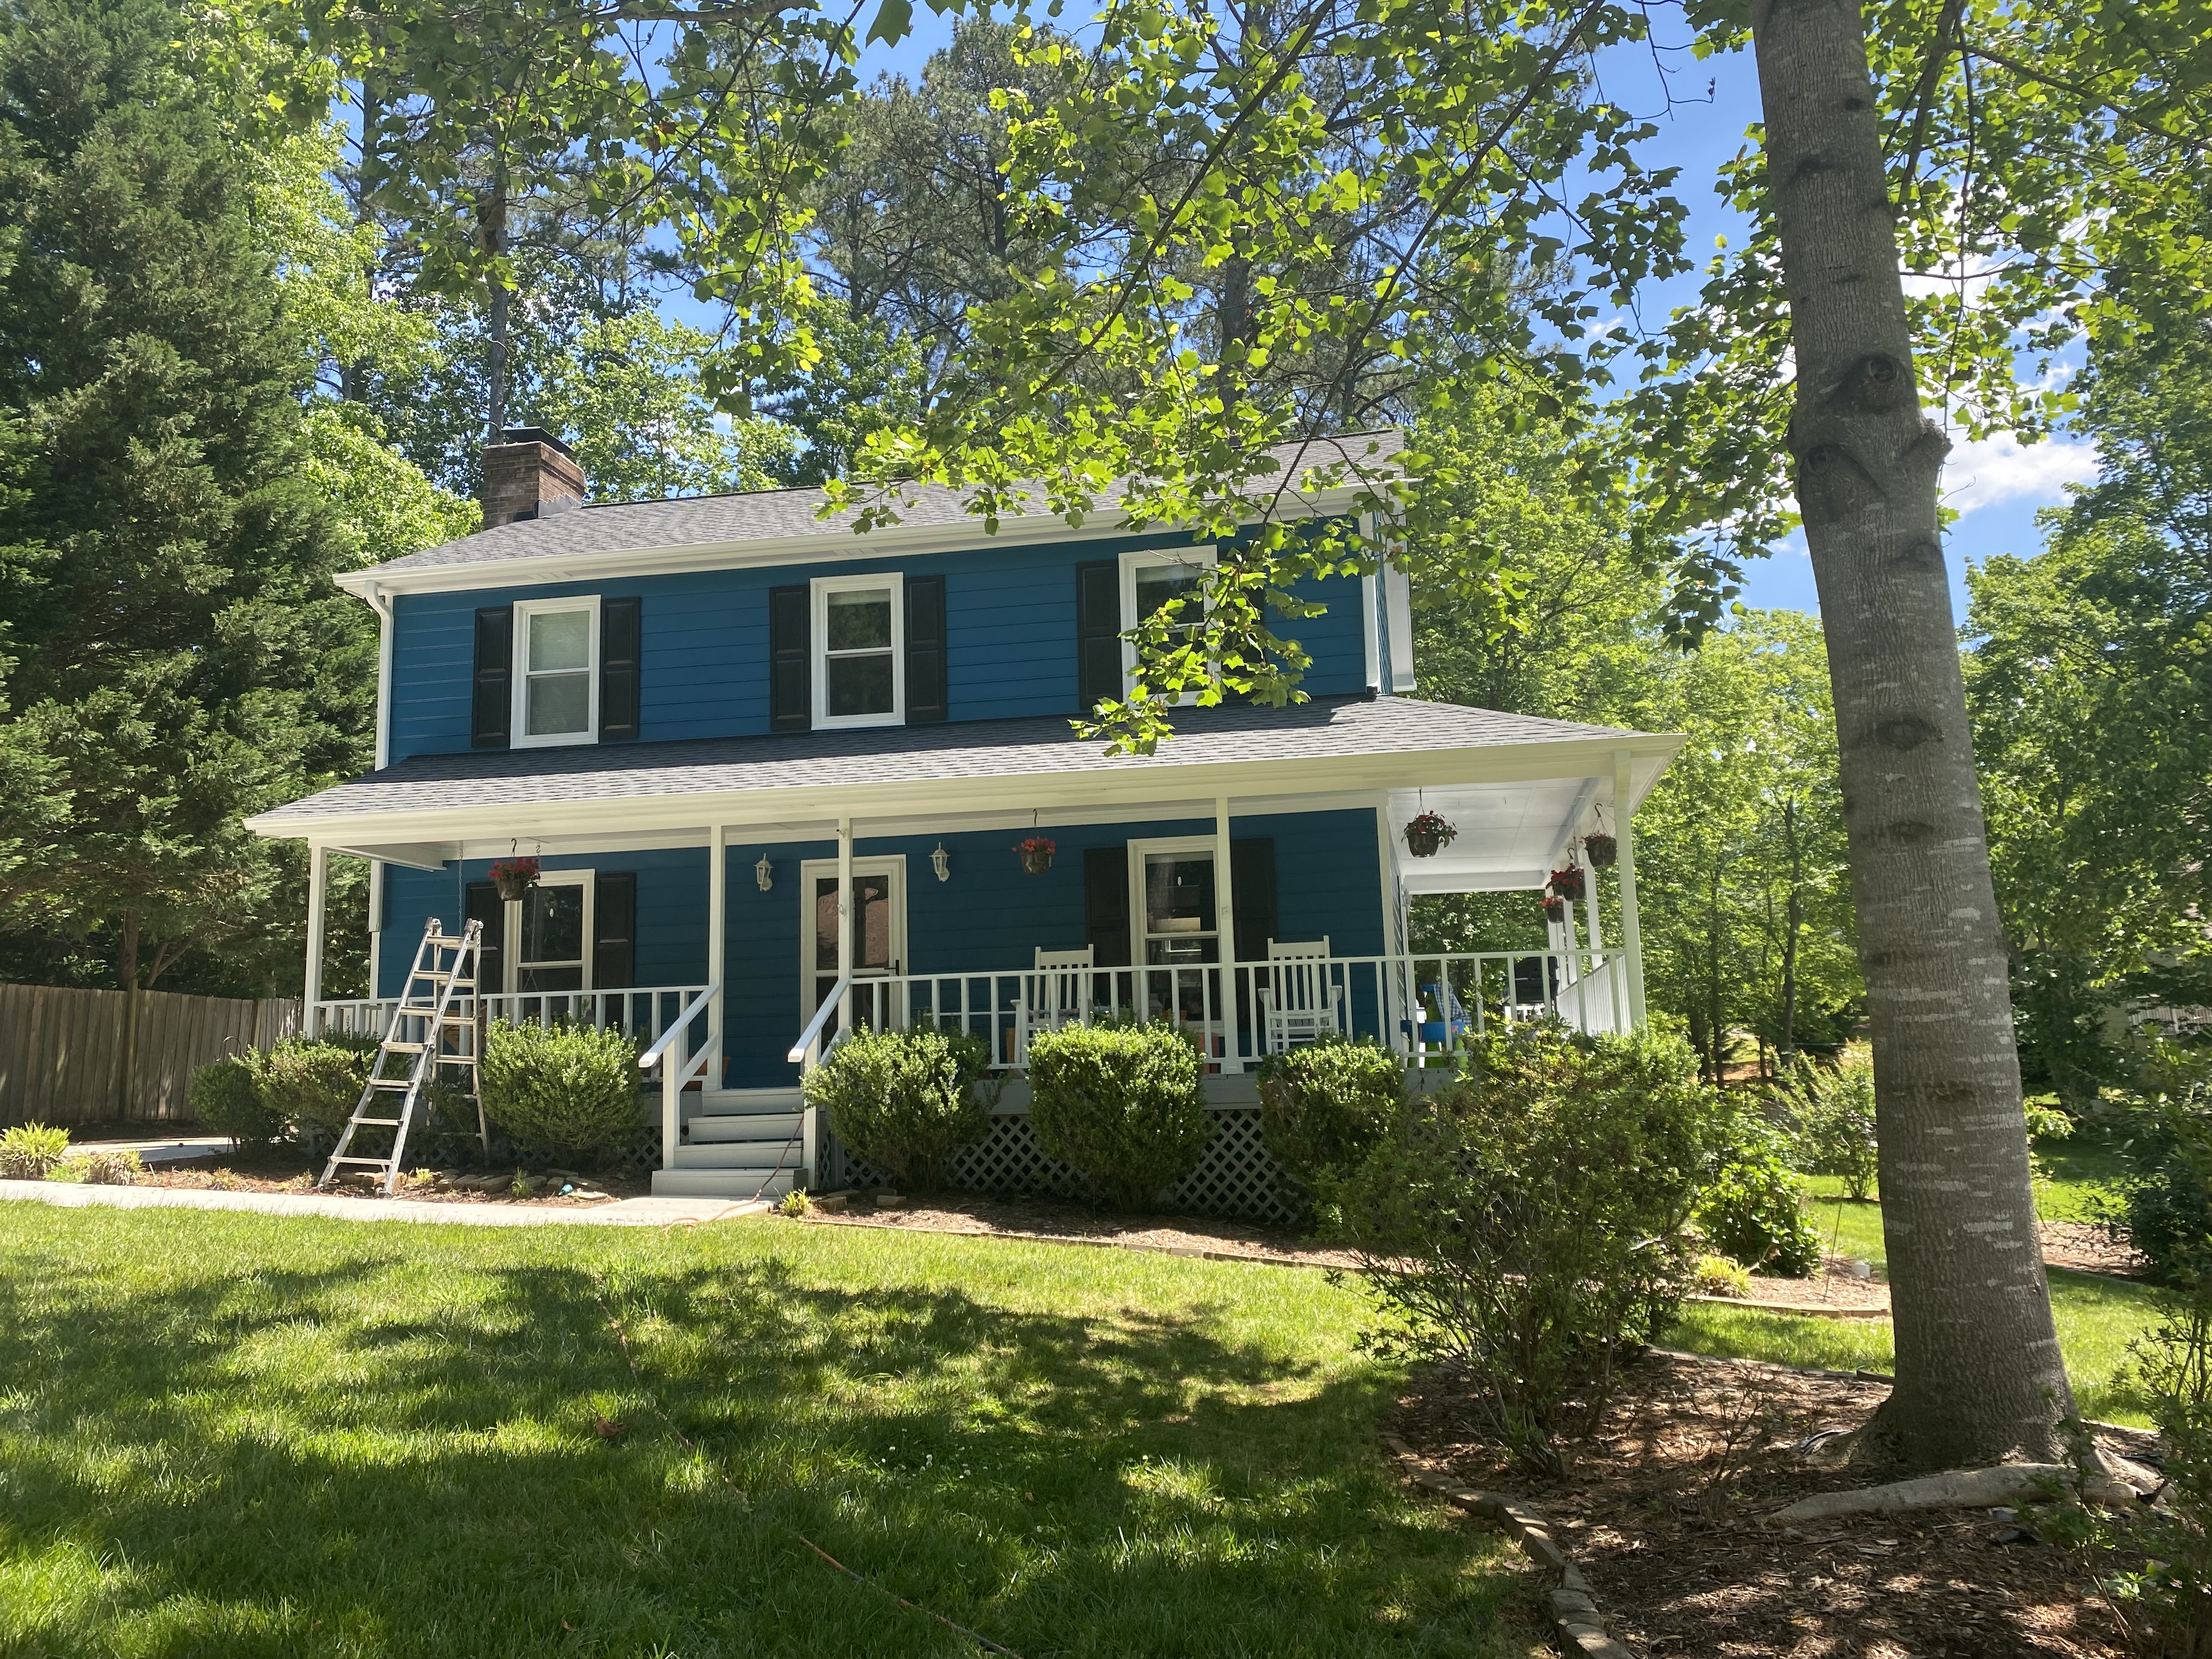 5 inch White Gutter System in Cary North Carloina